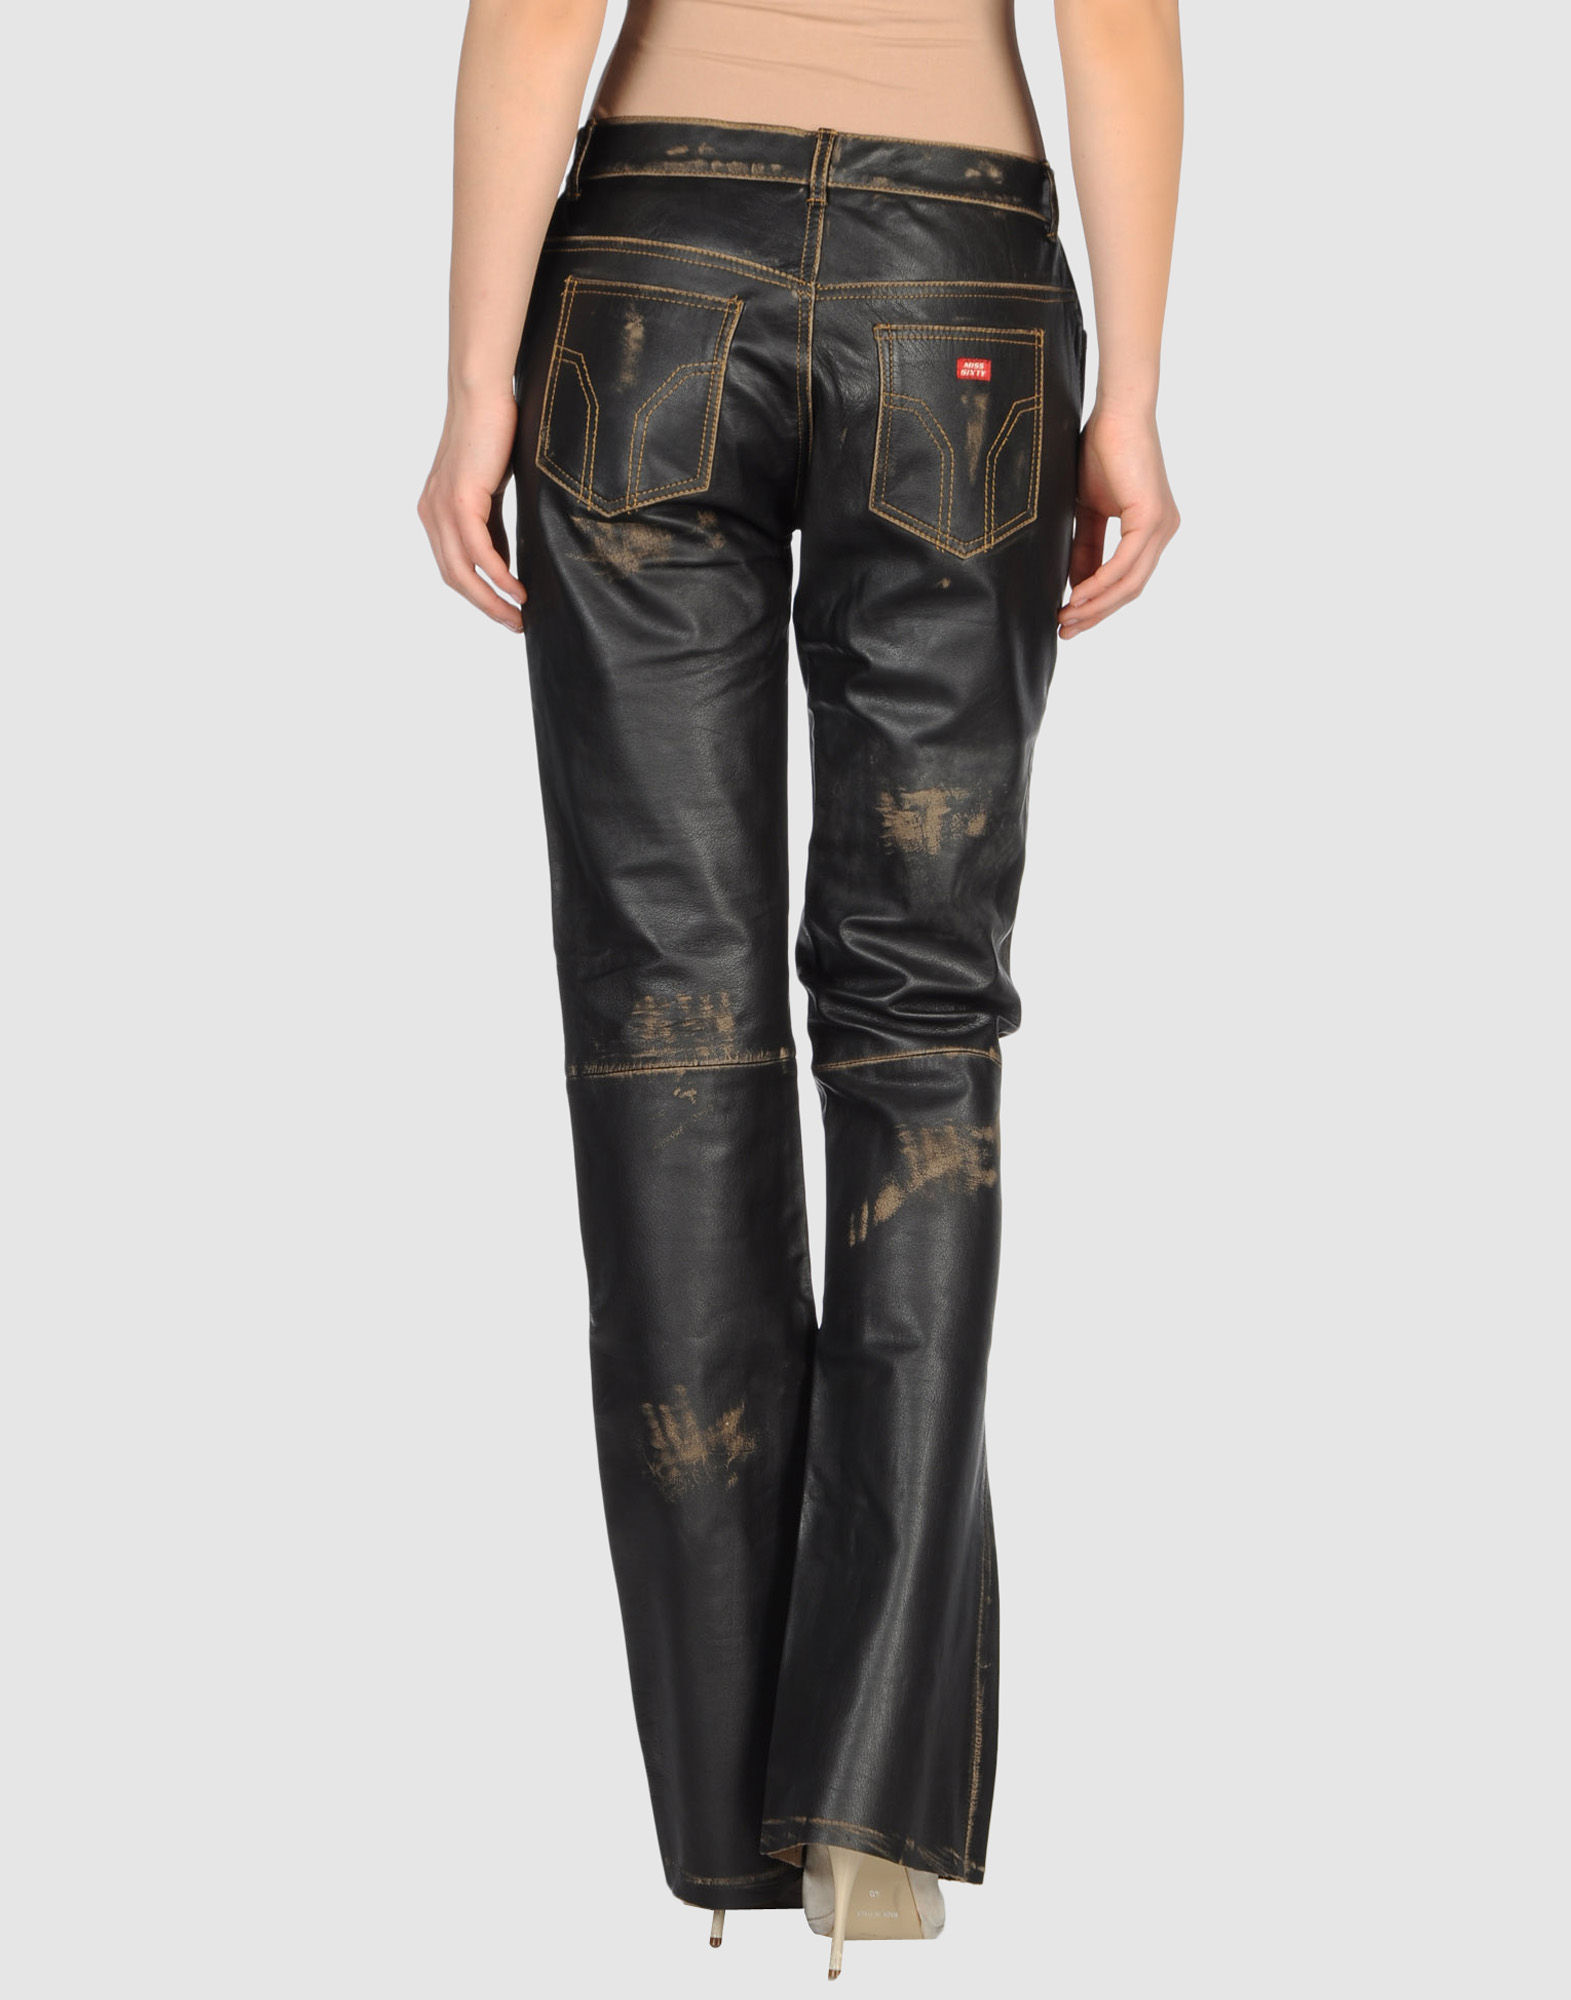 Miss Sixty Leather Pants in Black - Lyst